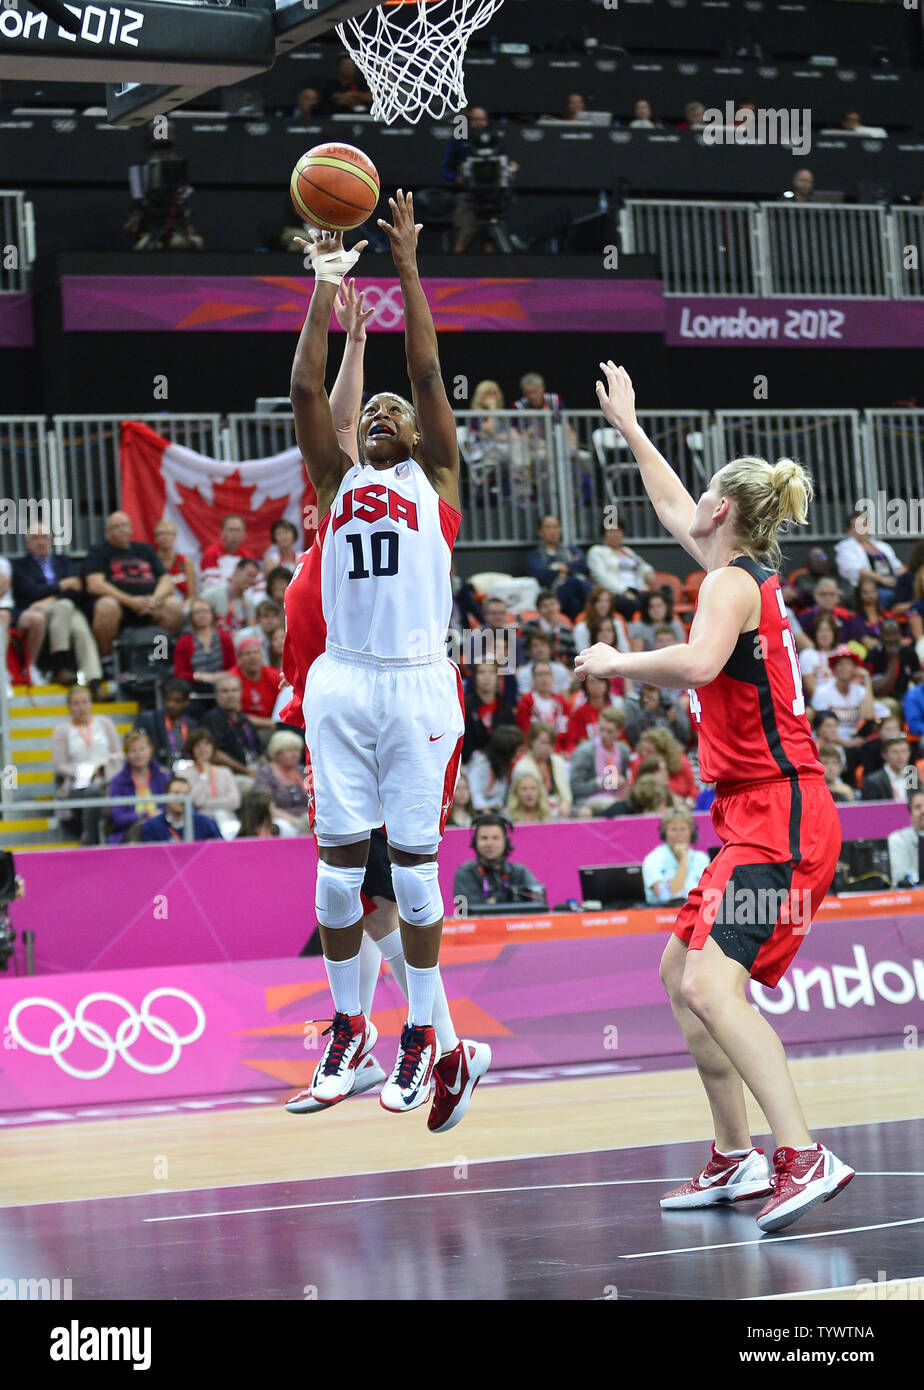 https://c8.alamy.com/comp/TYWTNA/guard-tamika-catchings-10-of-the-united-states-of-america-shoots-in-second-half-action-against-canada-in-the-womens-basketball-quarterfinal-at-the-london-2012-summer-olympics-on-august-7-2012-in-london-the-usa-won-the-game-91-48-upiron-sachs-TYWTNA.jpg